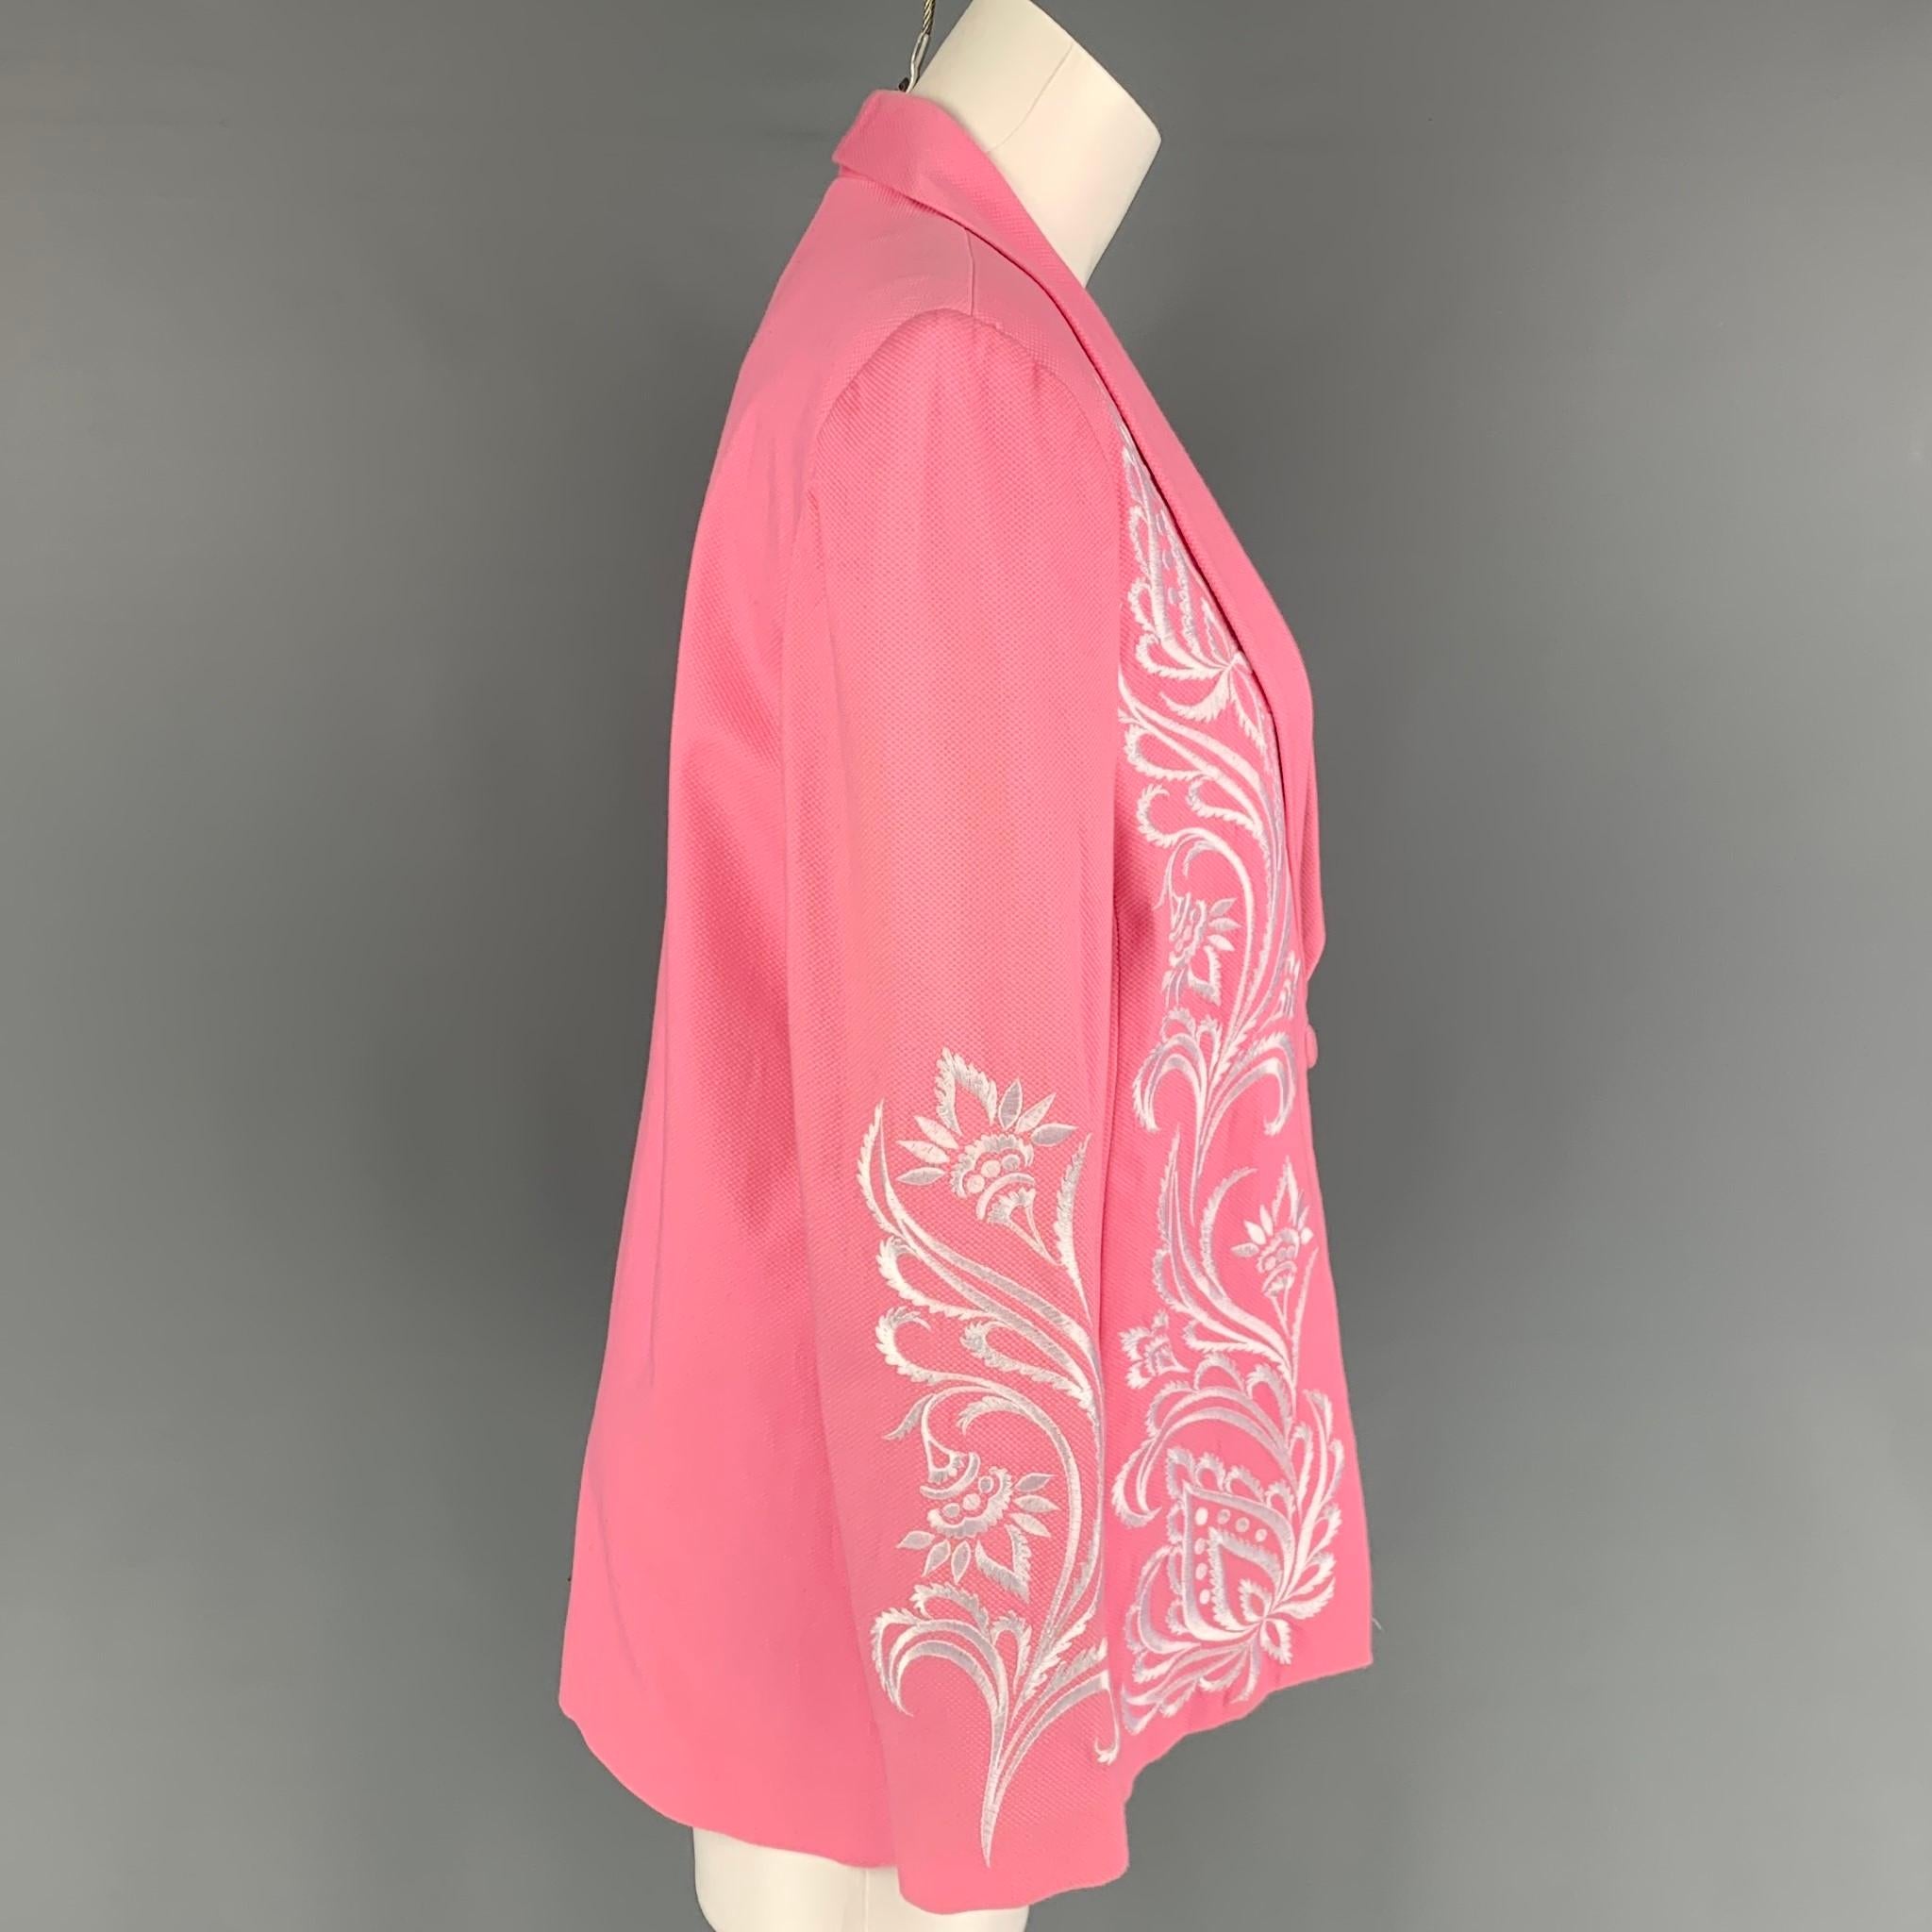 BOB MACKIE jacket blazer comes in a pink cotton with a full liner featuring a shawl collar, white embroidered designs, and a single button closure. 

New With Tags. 
Marked: S

Measurements:

Shoulder: 16 in.
Bust: 38 in.
Sleeve: 24 in.
Length: 27